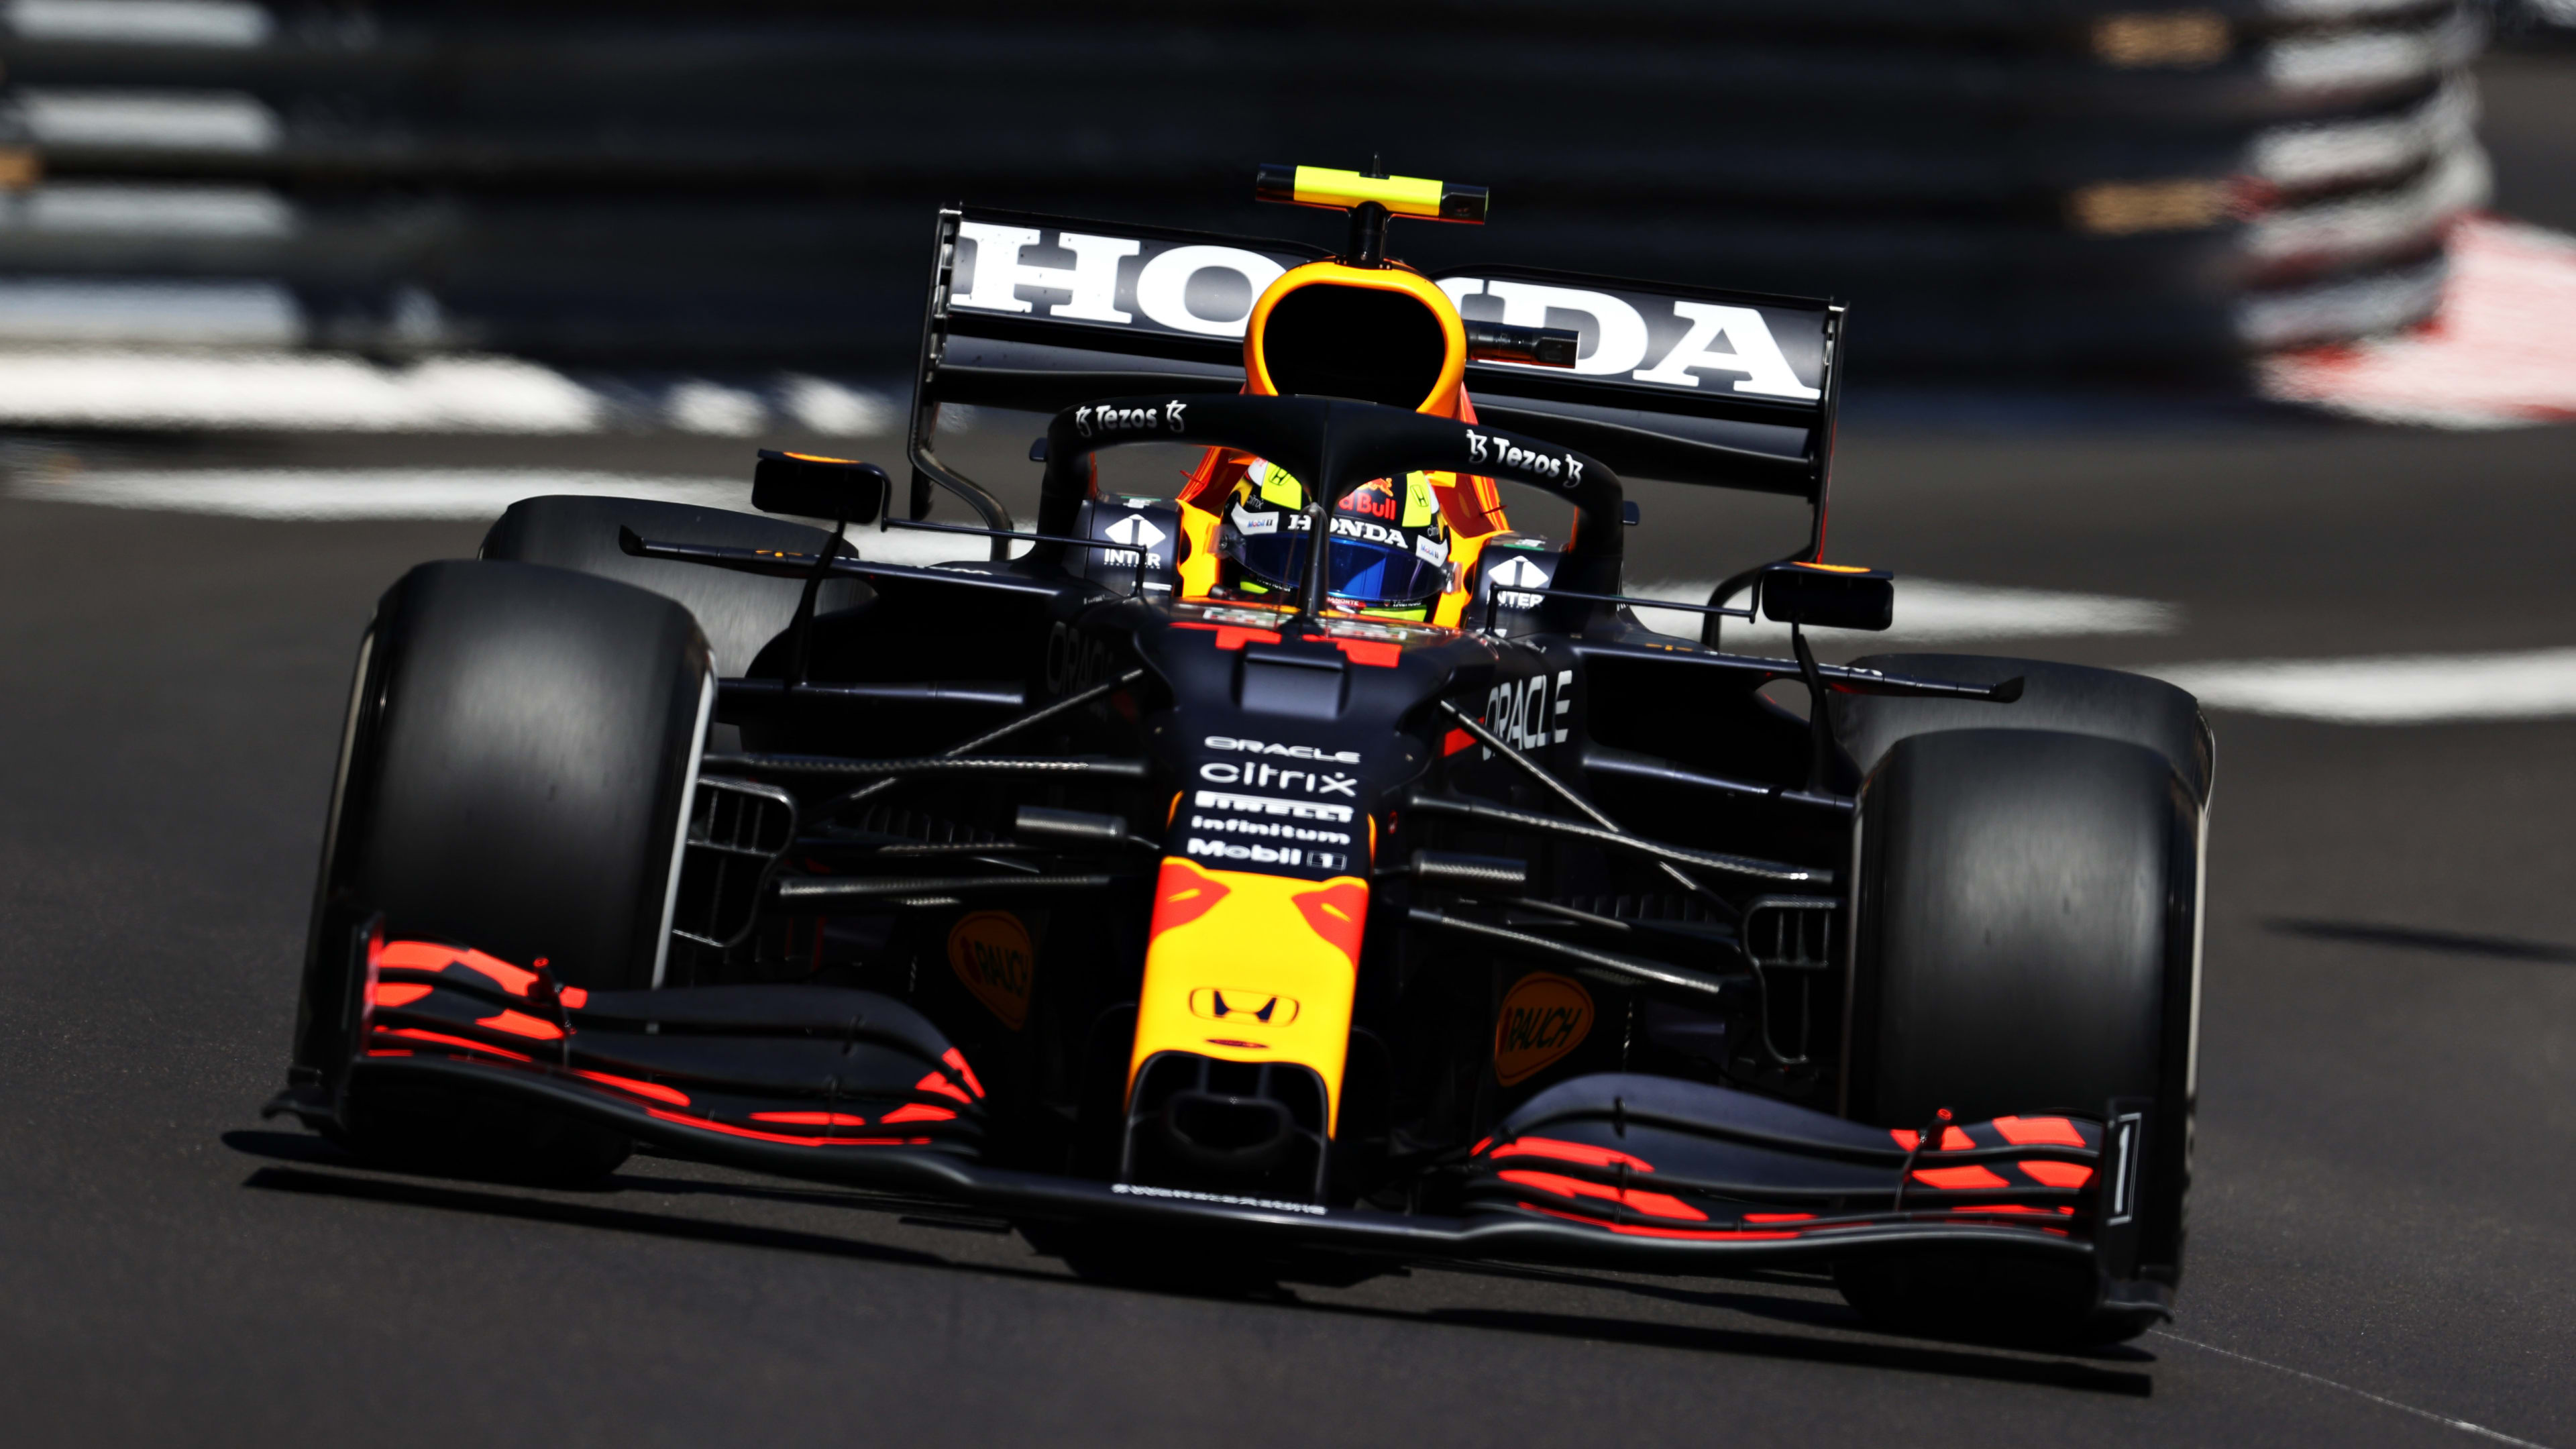 2021 Monaco Grand Prix FP1 report and highlights Perez, Sainz and Verstappen lead the opening practice session in Monaco Formula 1®